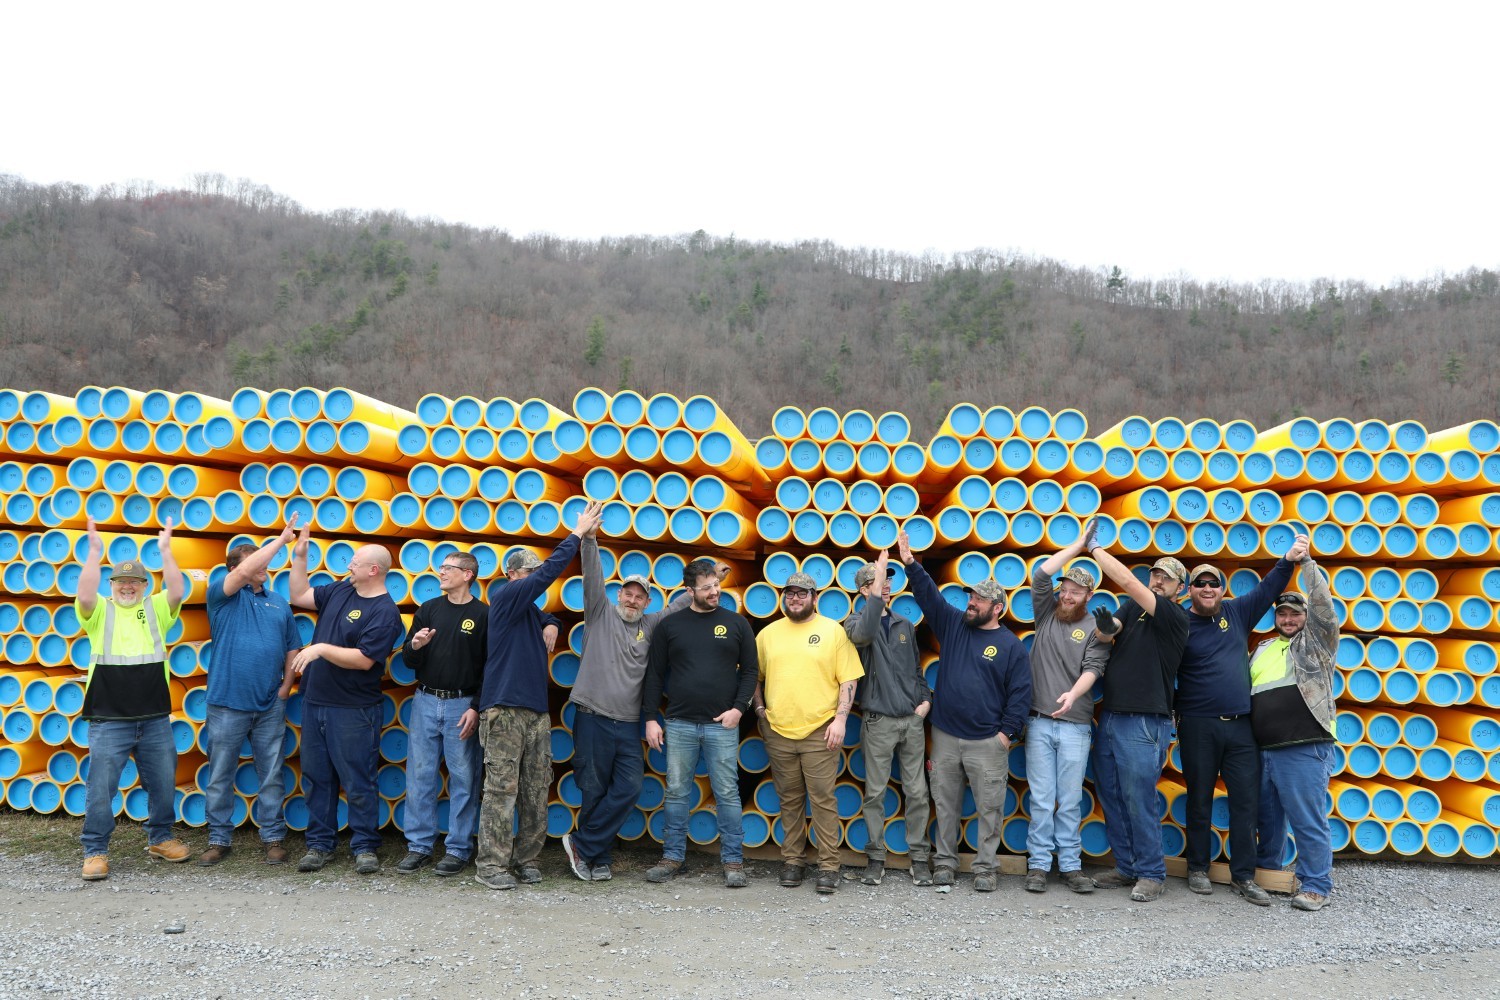 A few employees at our Erwin, TN facility